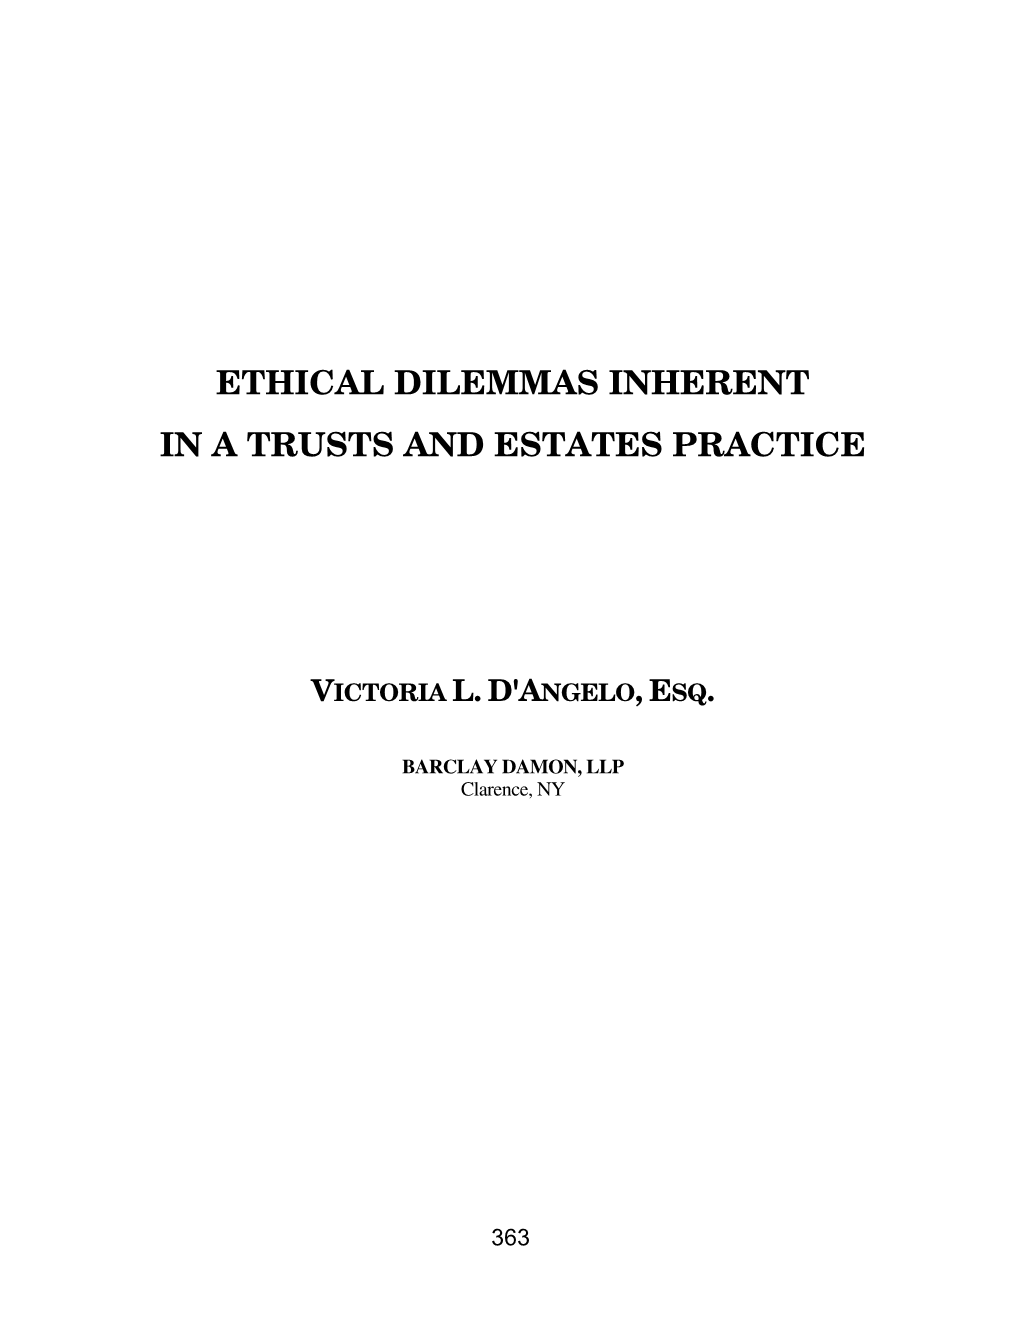 Ethical Dilemmas Inherent in a Trusts and Estates Practice